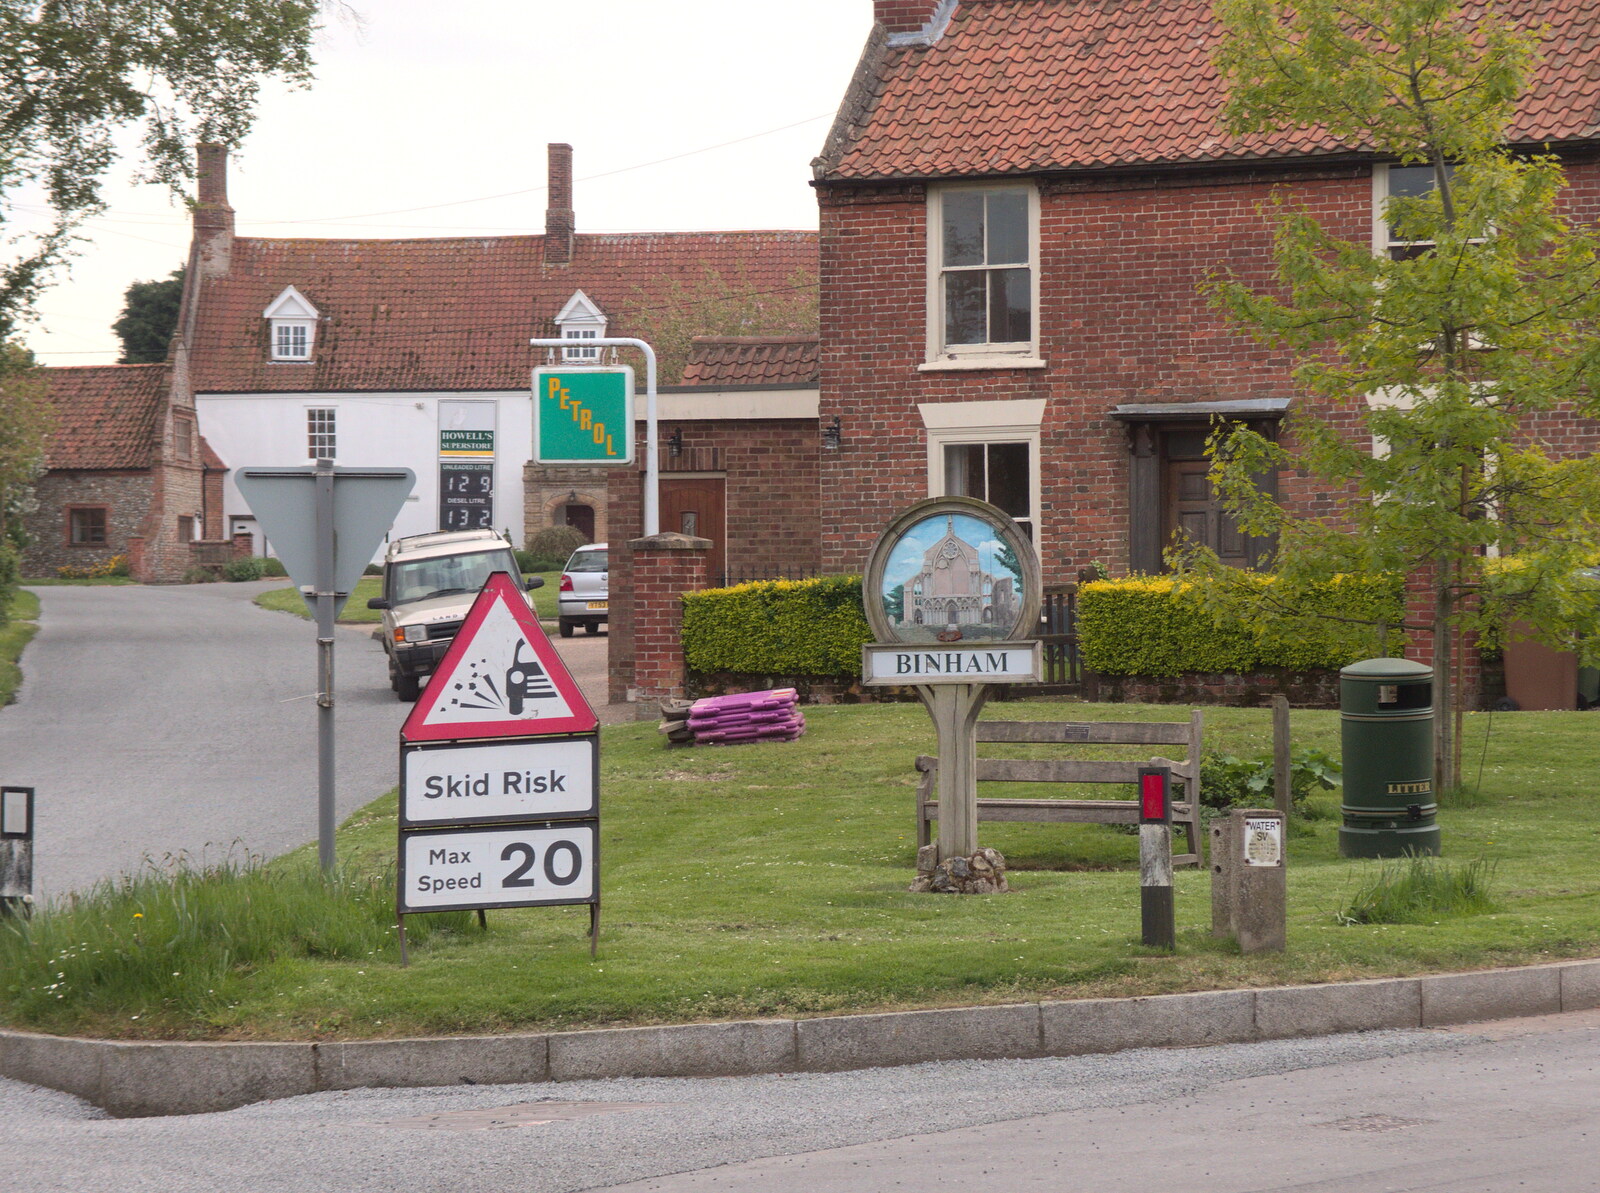 The Binham village sign from The BSCC Weekend Away, Holt, Norfolk - 12th May 2018